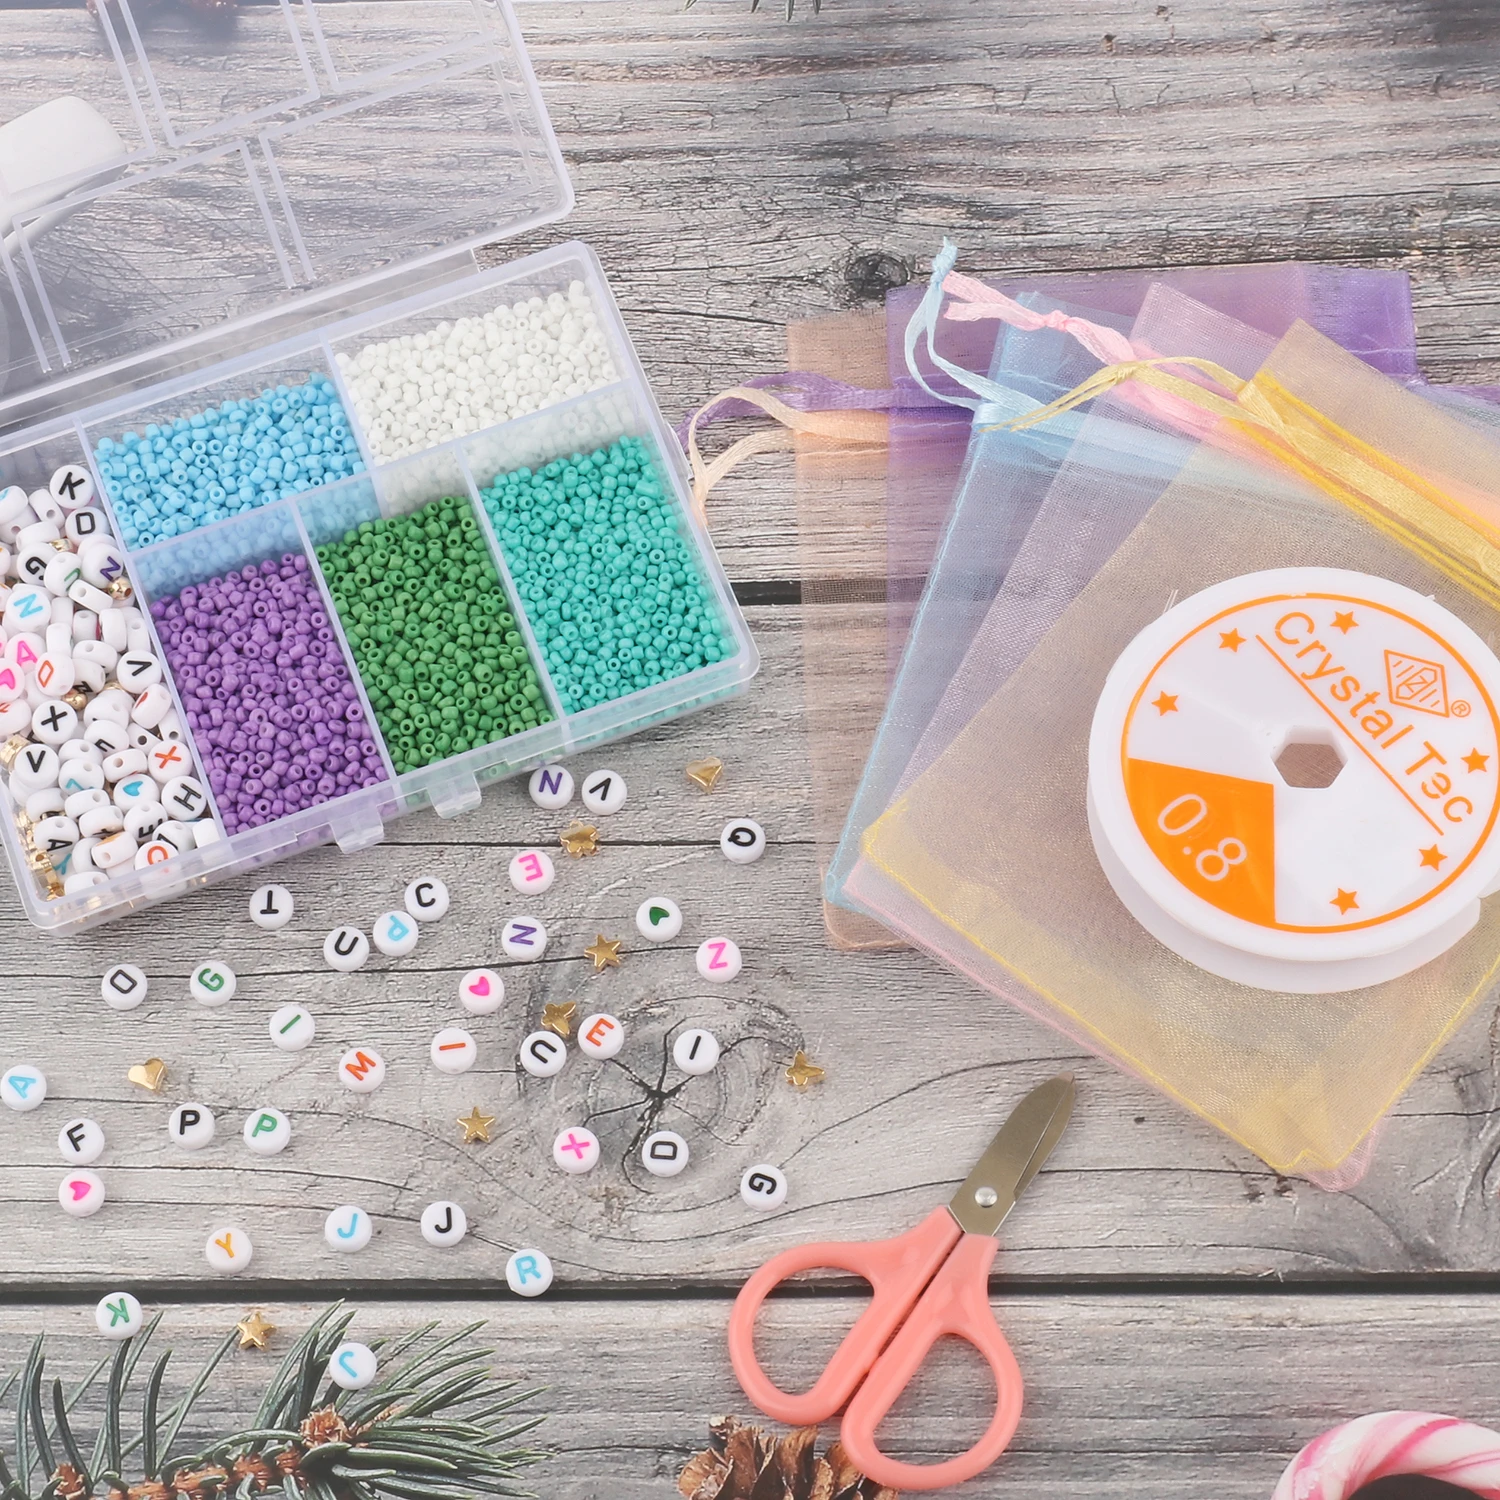 Bead Bracelet Making Kit, Shynek Bead Friendship Bracelets Kit with Pony Beads  Letter Beads Charm Beads and Elastic String for Bracelet and Jewelry Making  : Amazon.in: Home & Kitchen